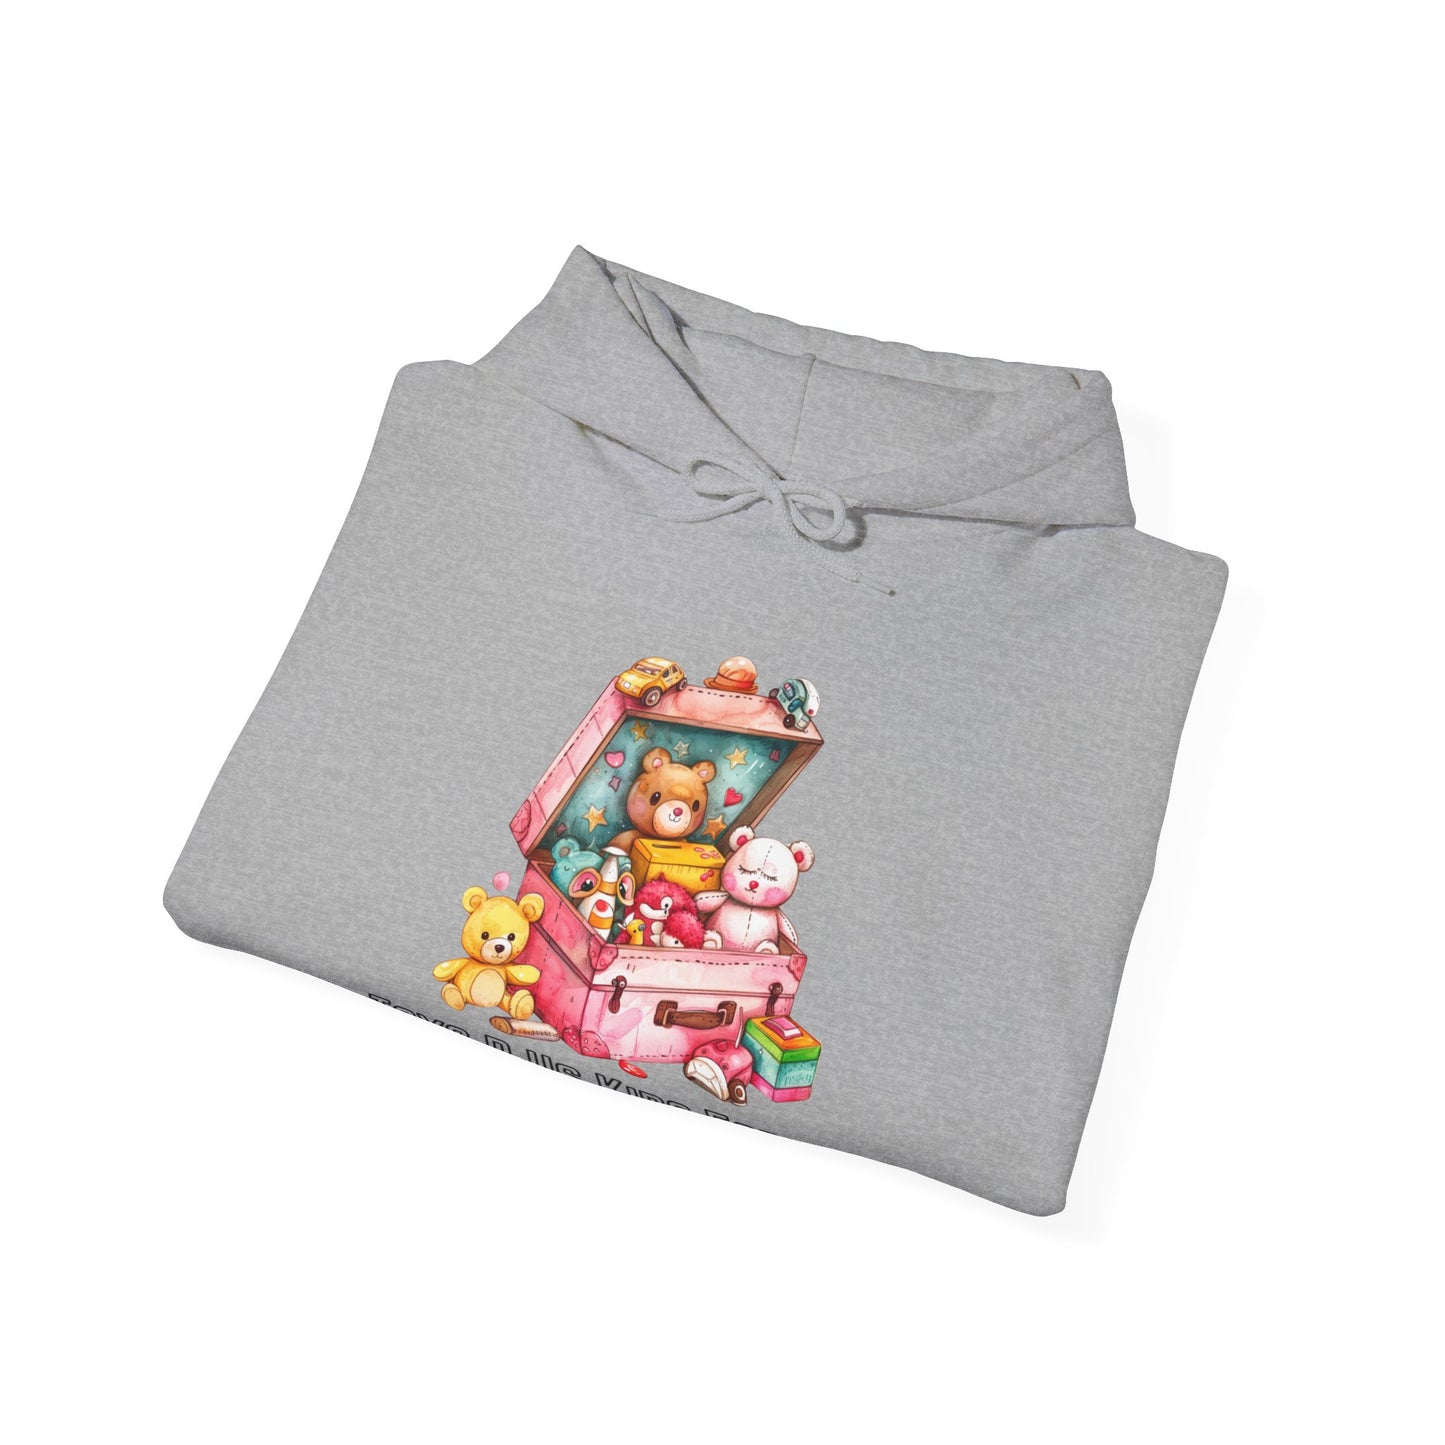 90s Edition,Toys R Us Kids Forever Hoody for Women